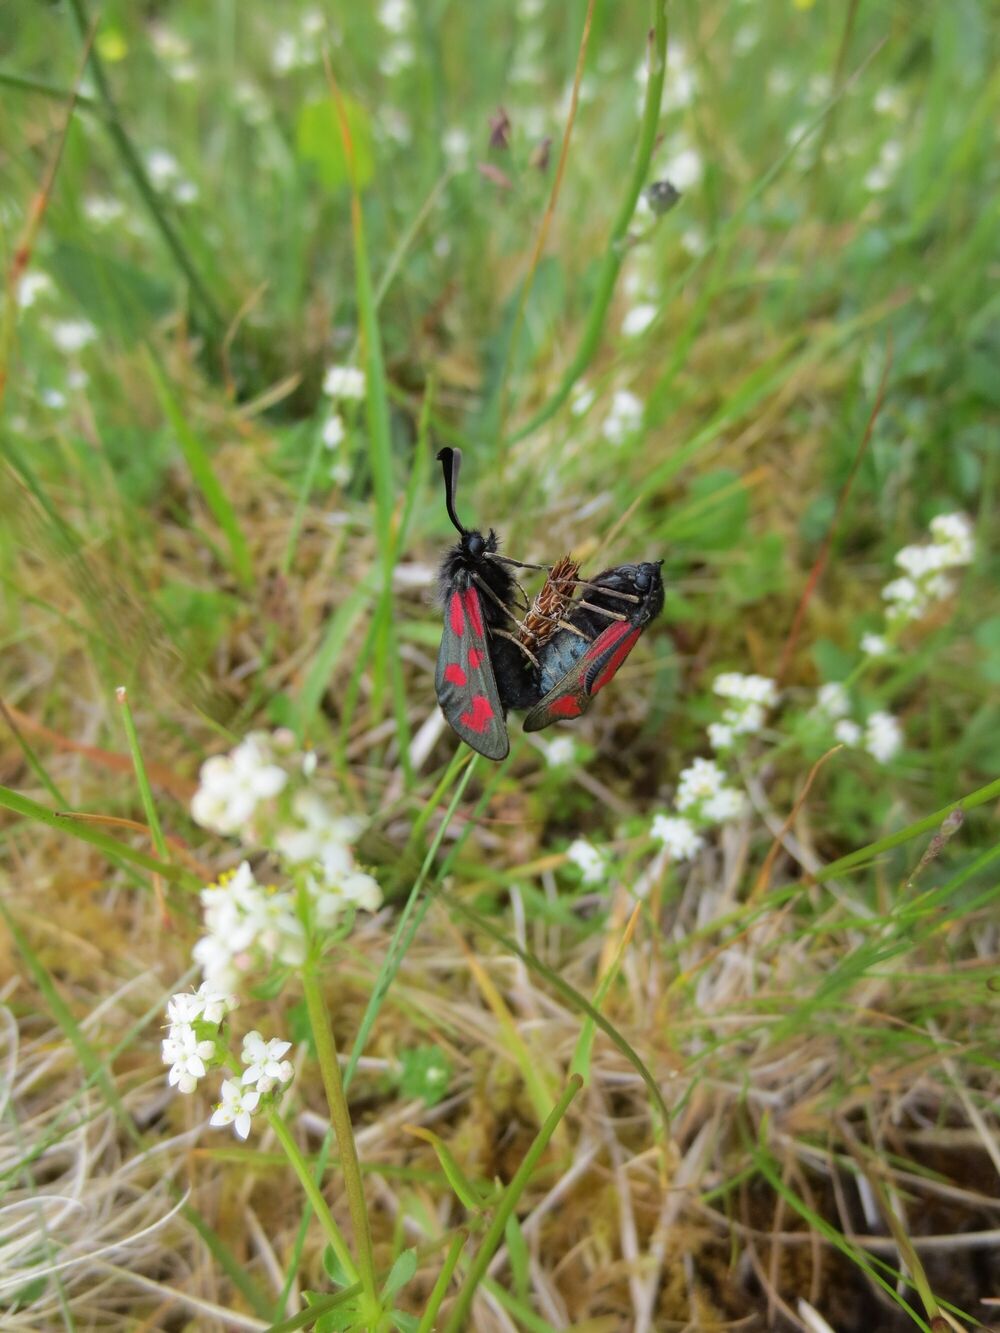 Two red and black slender Scotch burnet moths among wildflowers and long grass.